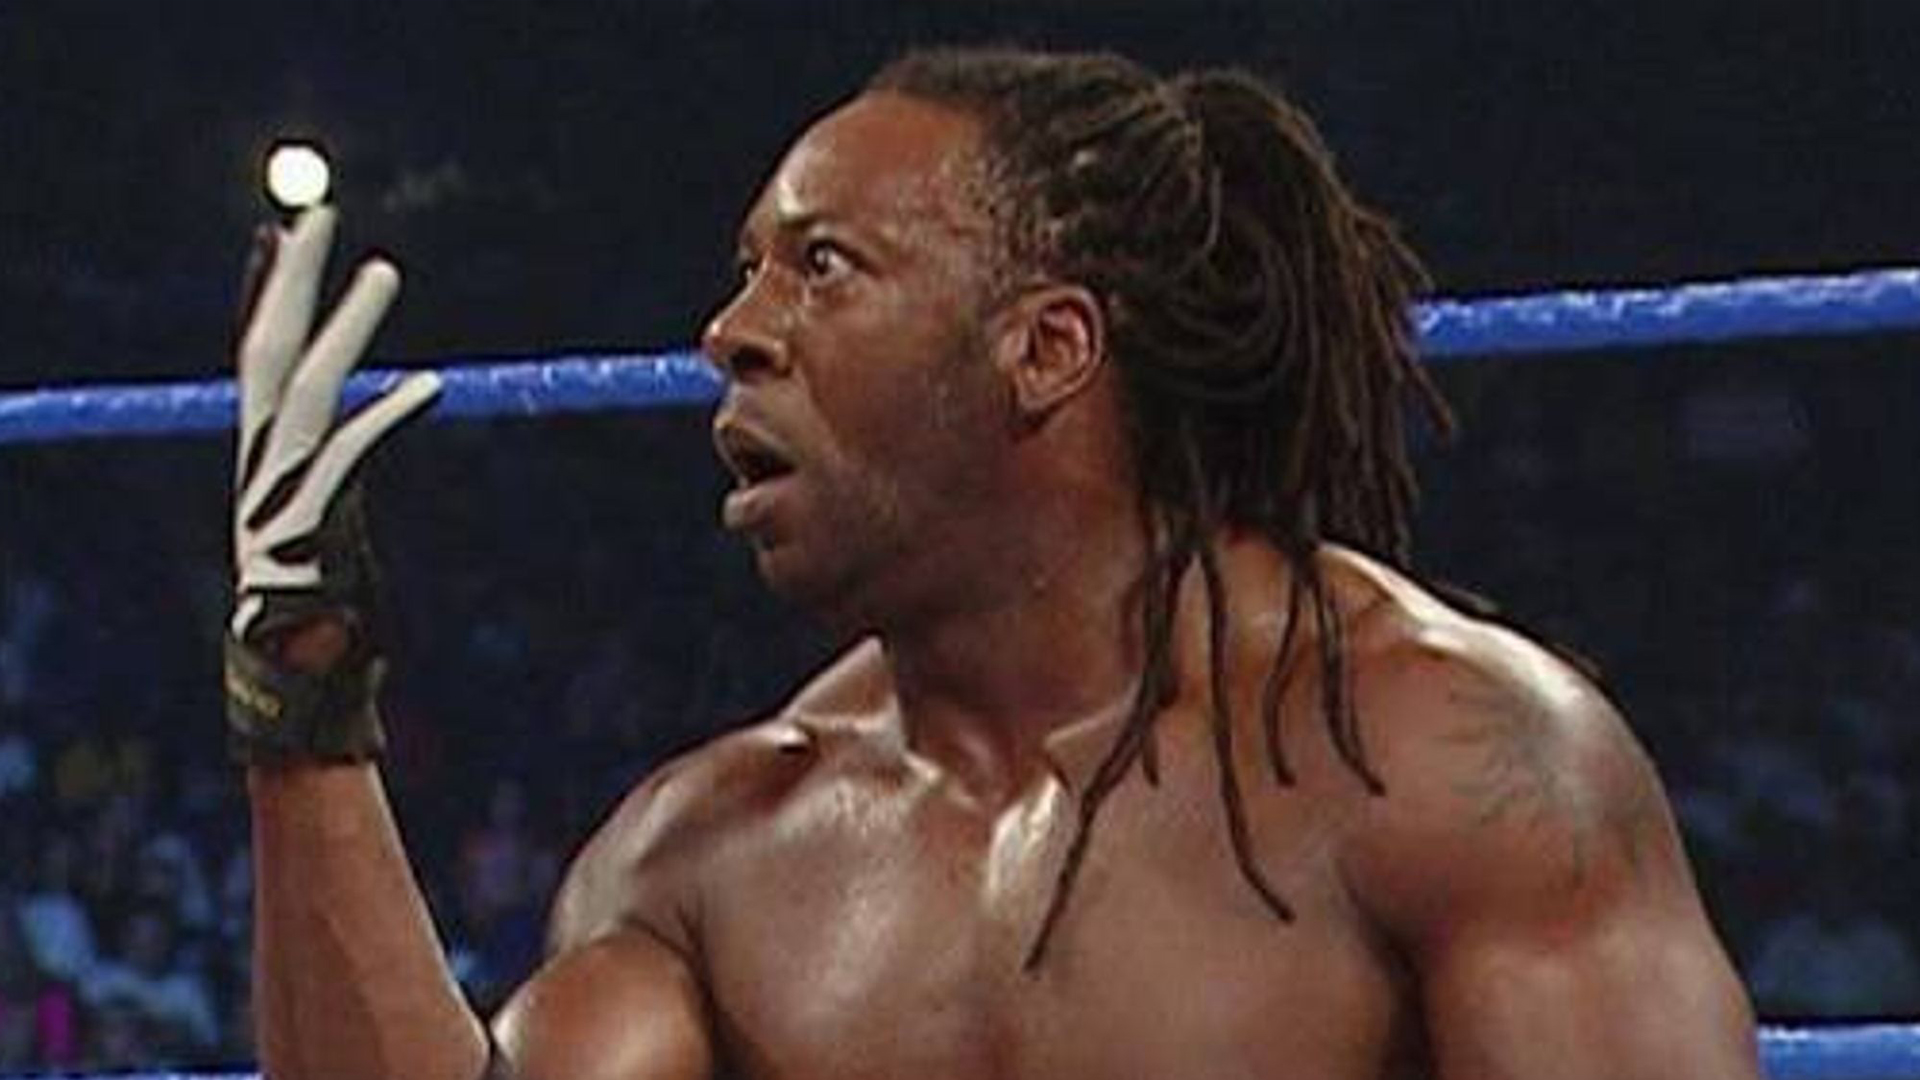 Wrestler Booker T Loses Lawsuit Against Call of Duty - IGN